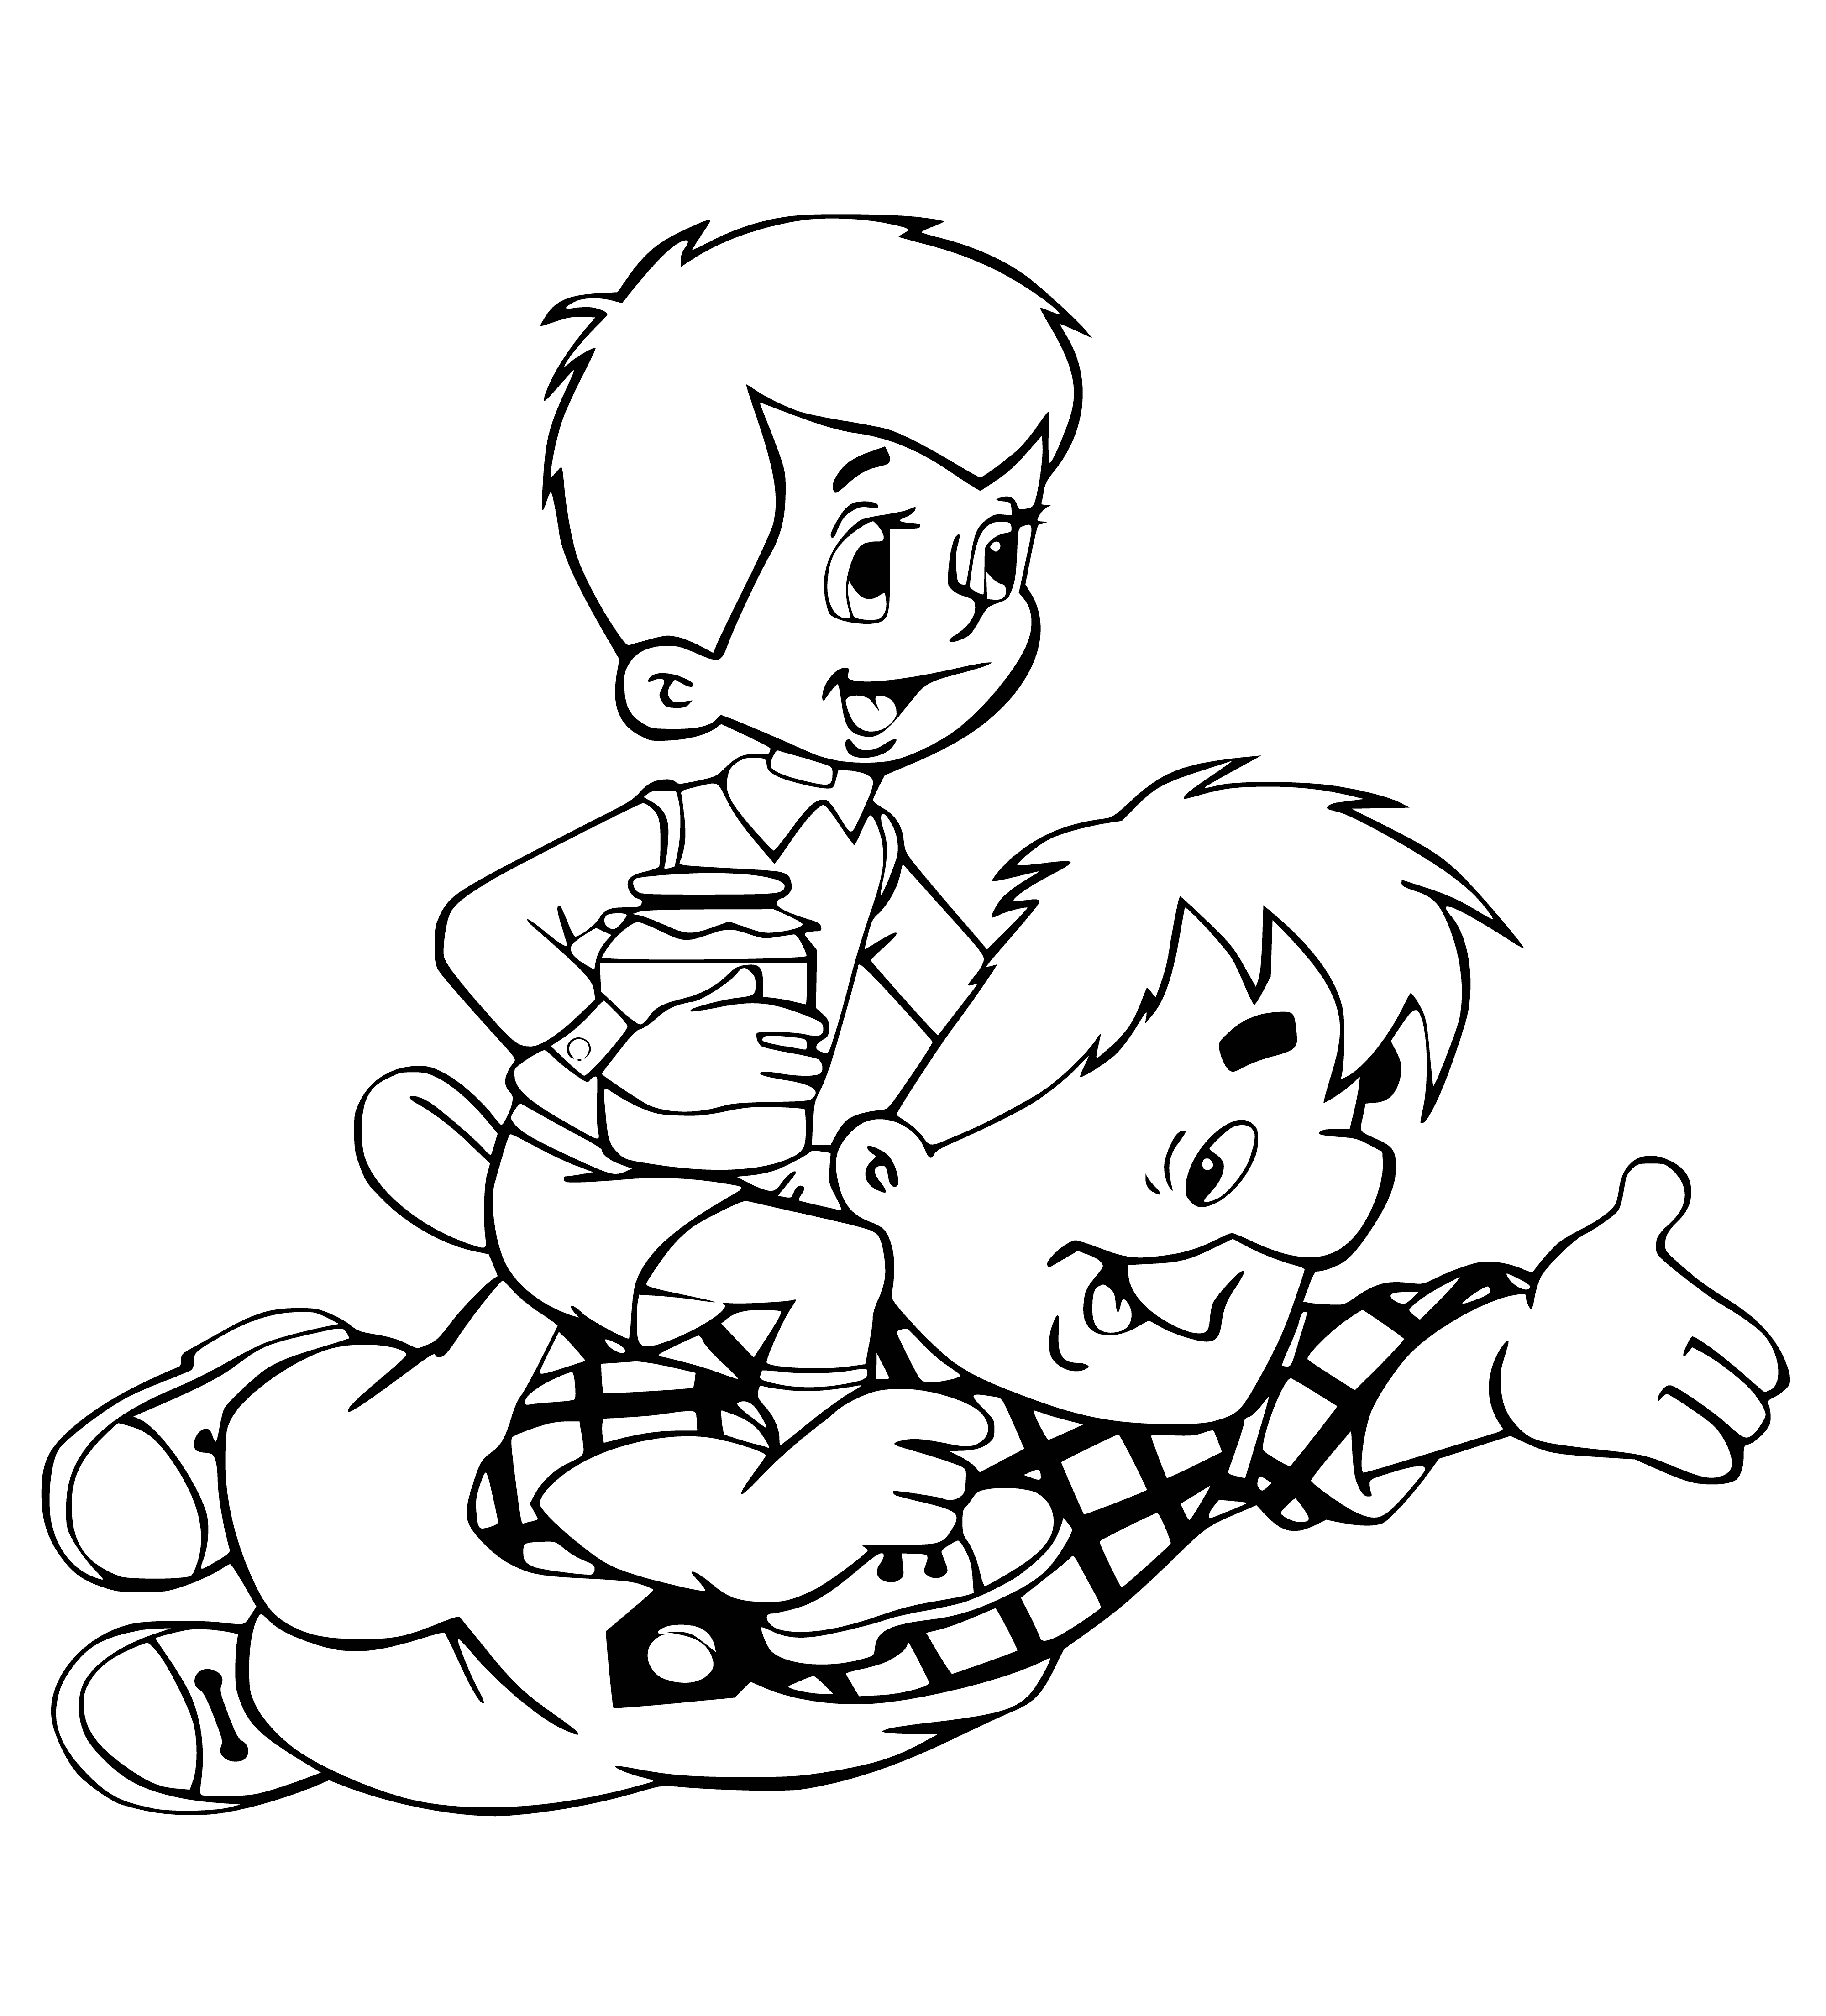 coloring page: Big kid & small man weightlifting, kid in blue, man in brown& suspenders. Small table w/plate of food to right. #coloringpage